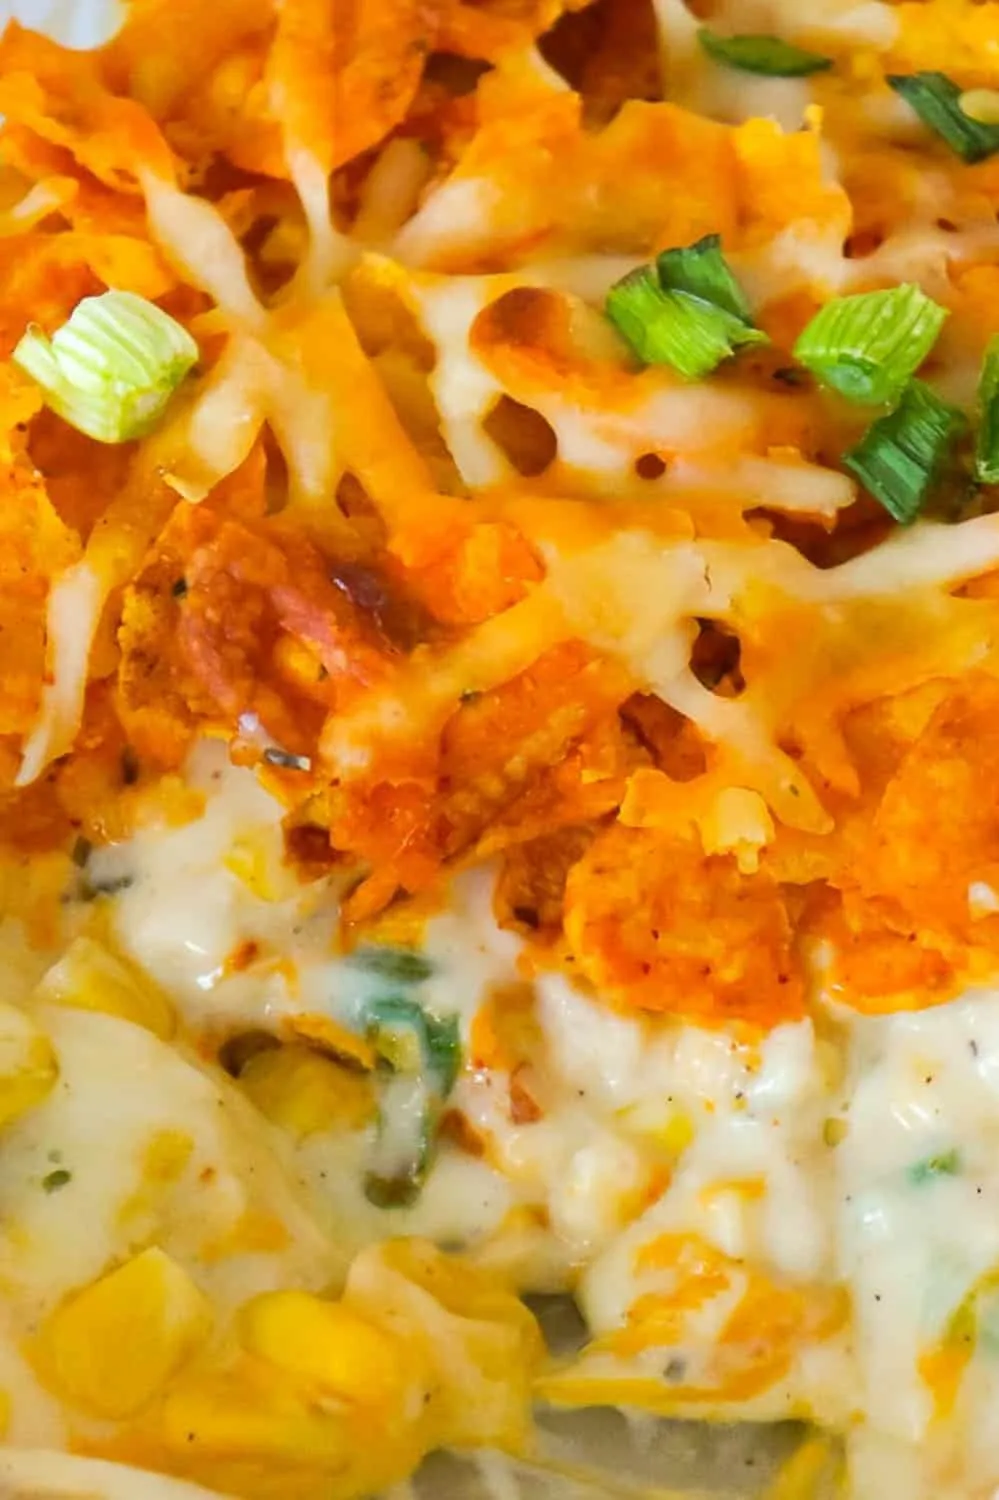 Doritos Casserole with Chicken is an easy weeknight dinner recipe using rotisserie chicken. This creamy chicken casserole is loaded with cream cheese, corn, shredded cheddar and topped with crumbled Doritos.